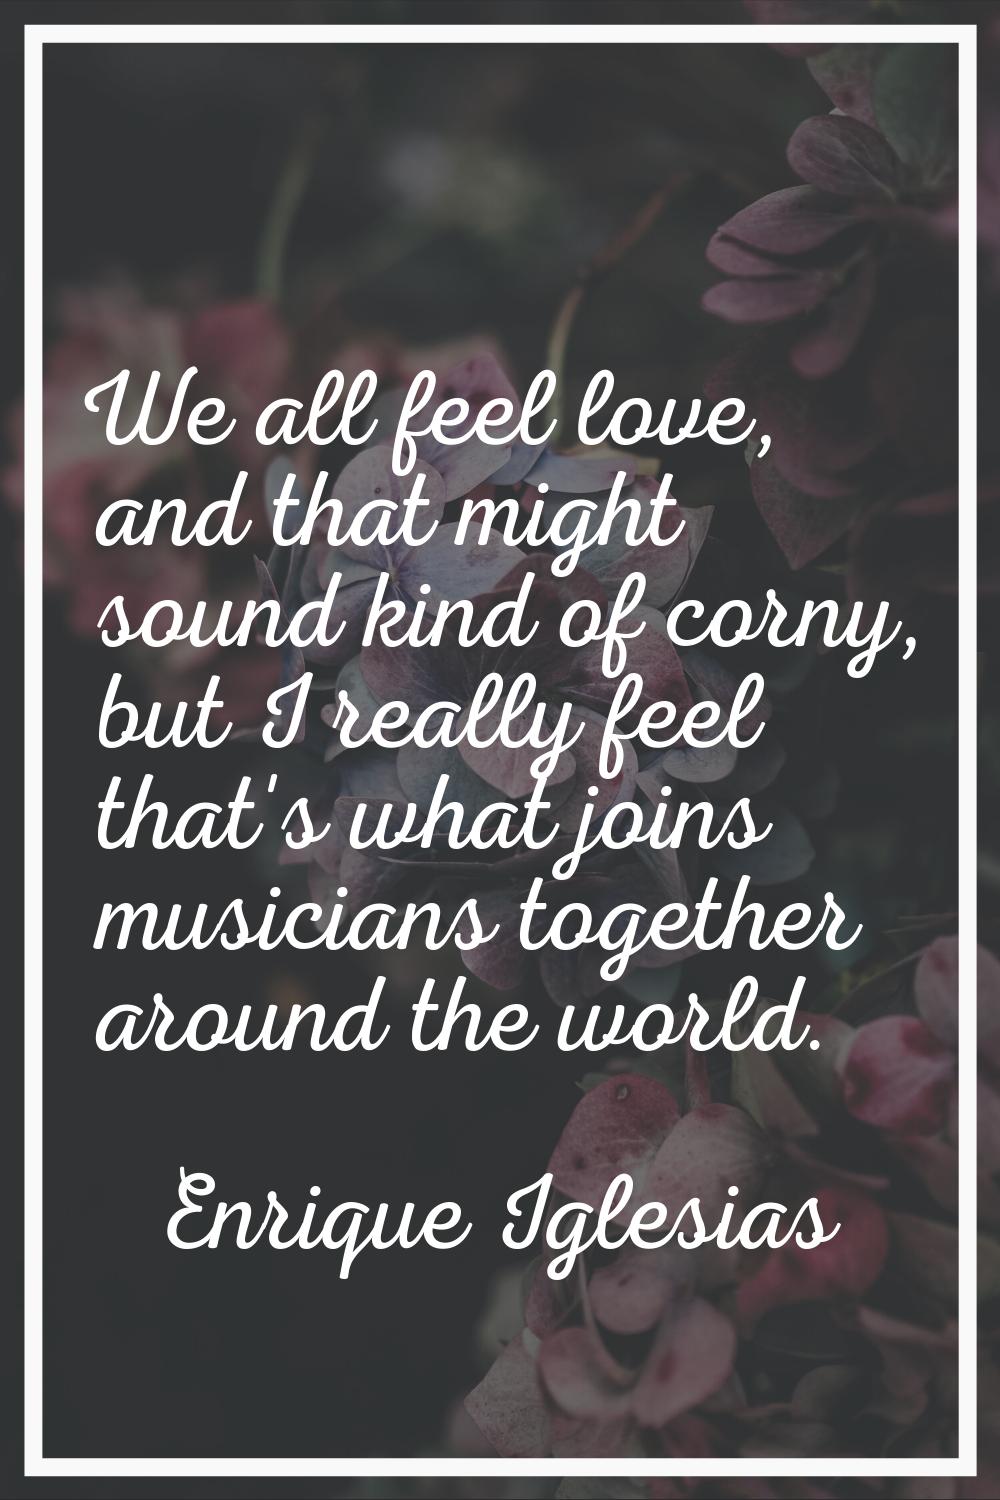 We all feel love, and that might sound kind of corny, but I really feel that's what joins musicians